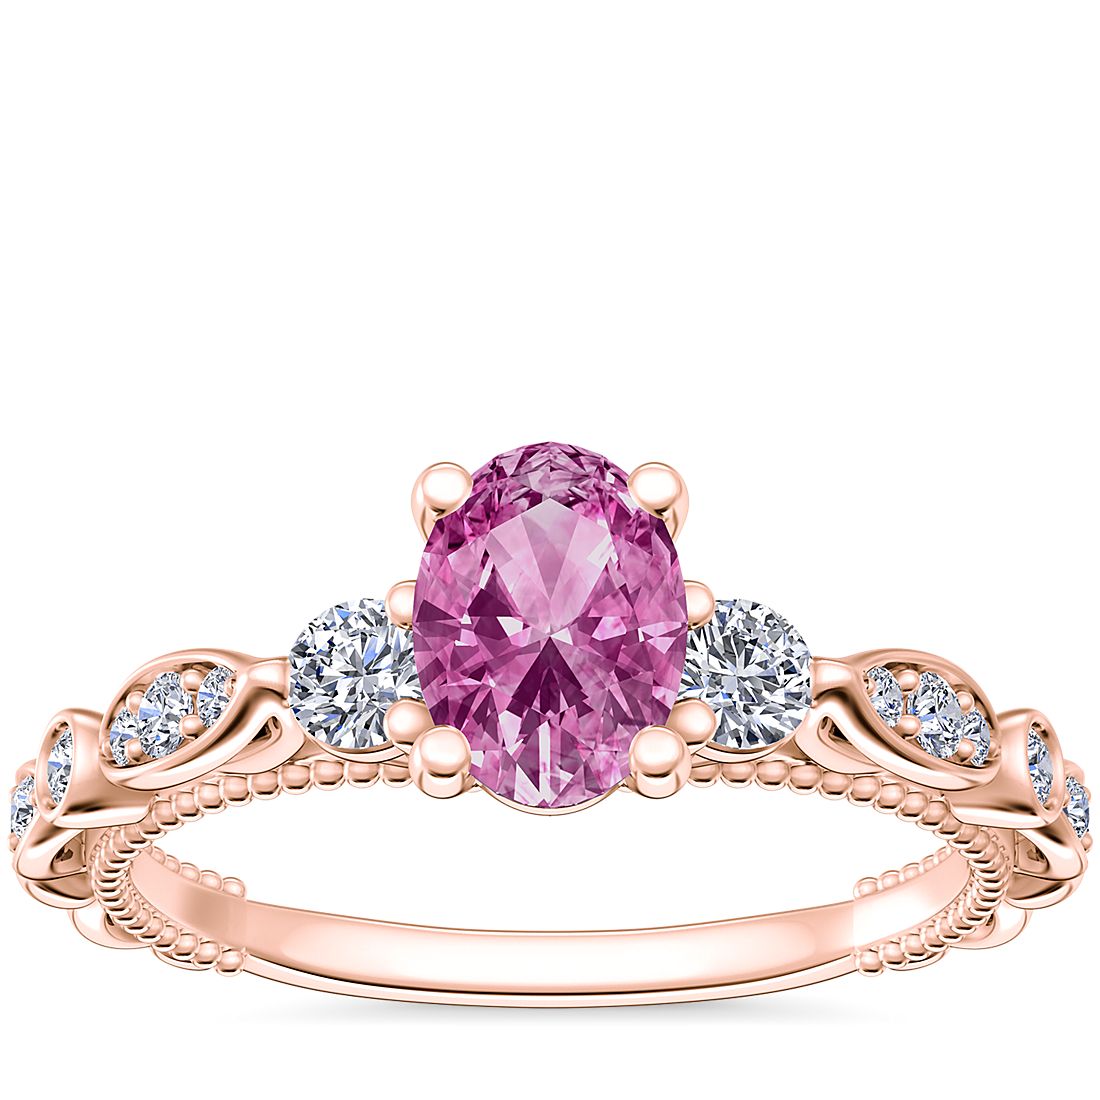 Floral Ellipse Diamond Cathedral Engagement Ring with Oval Pink Sapphire in 14k Rose Gold (7x5mm)